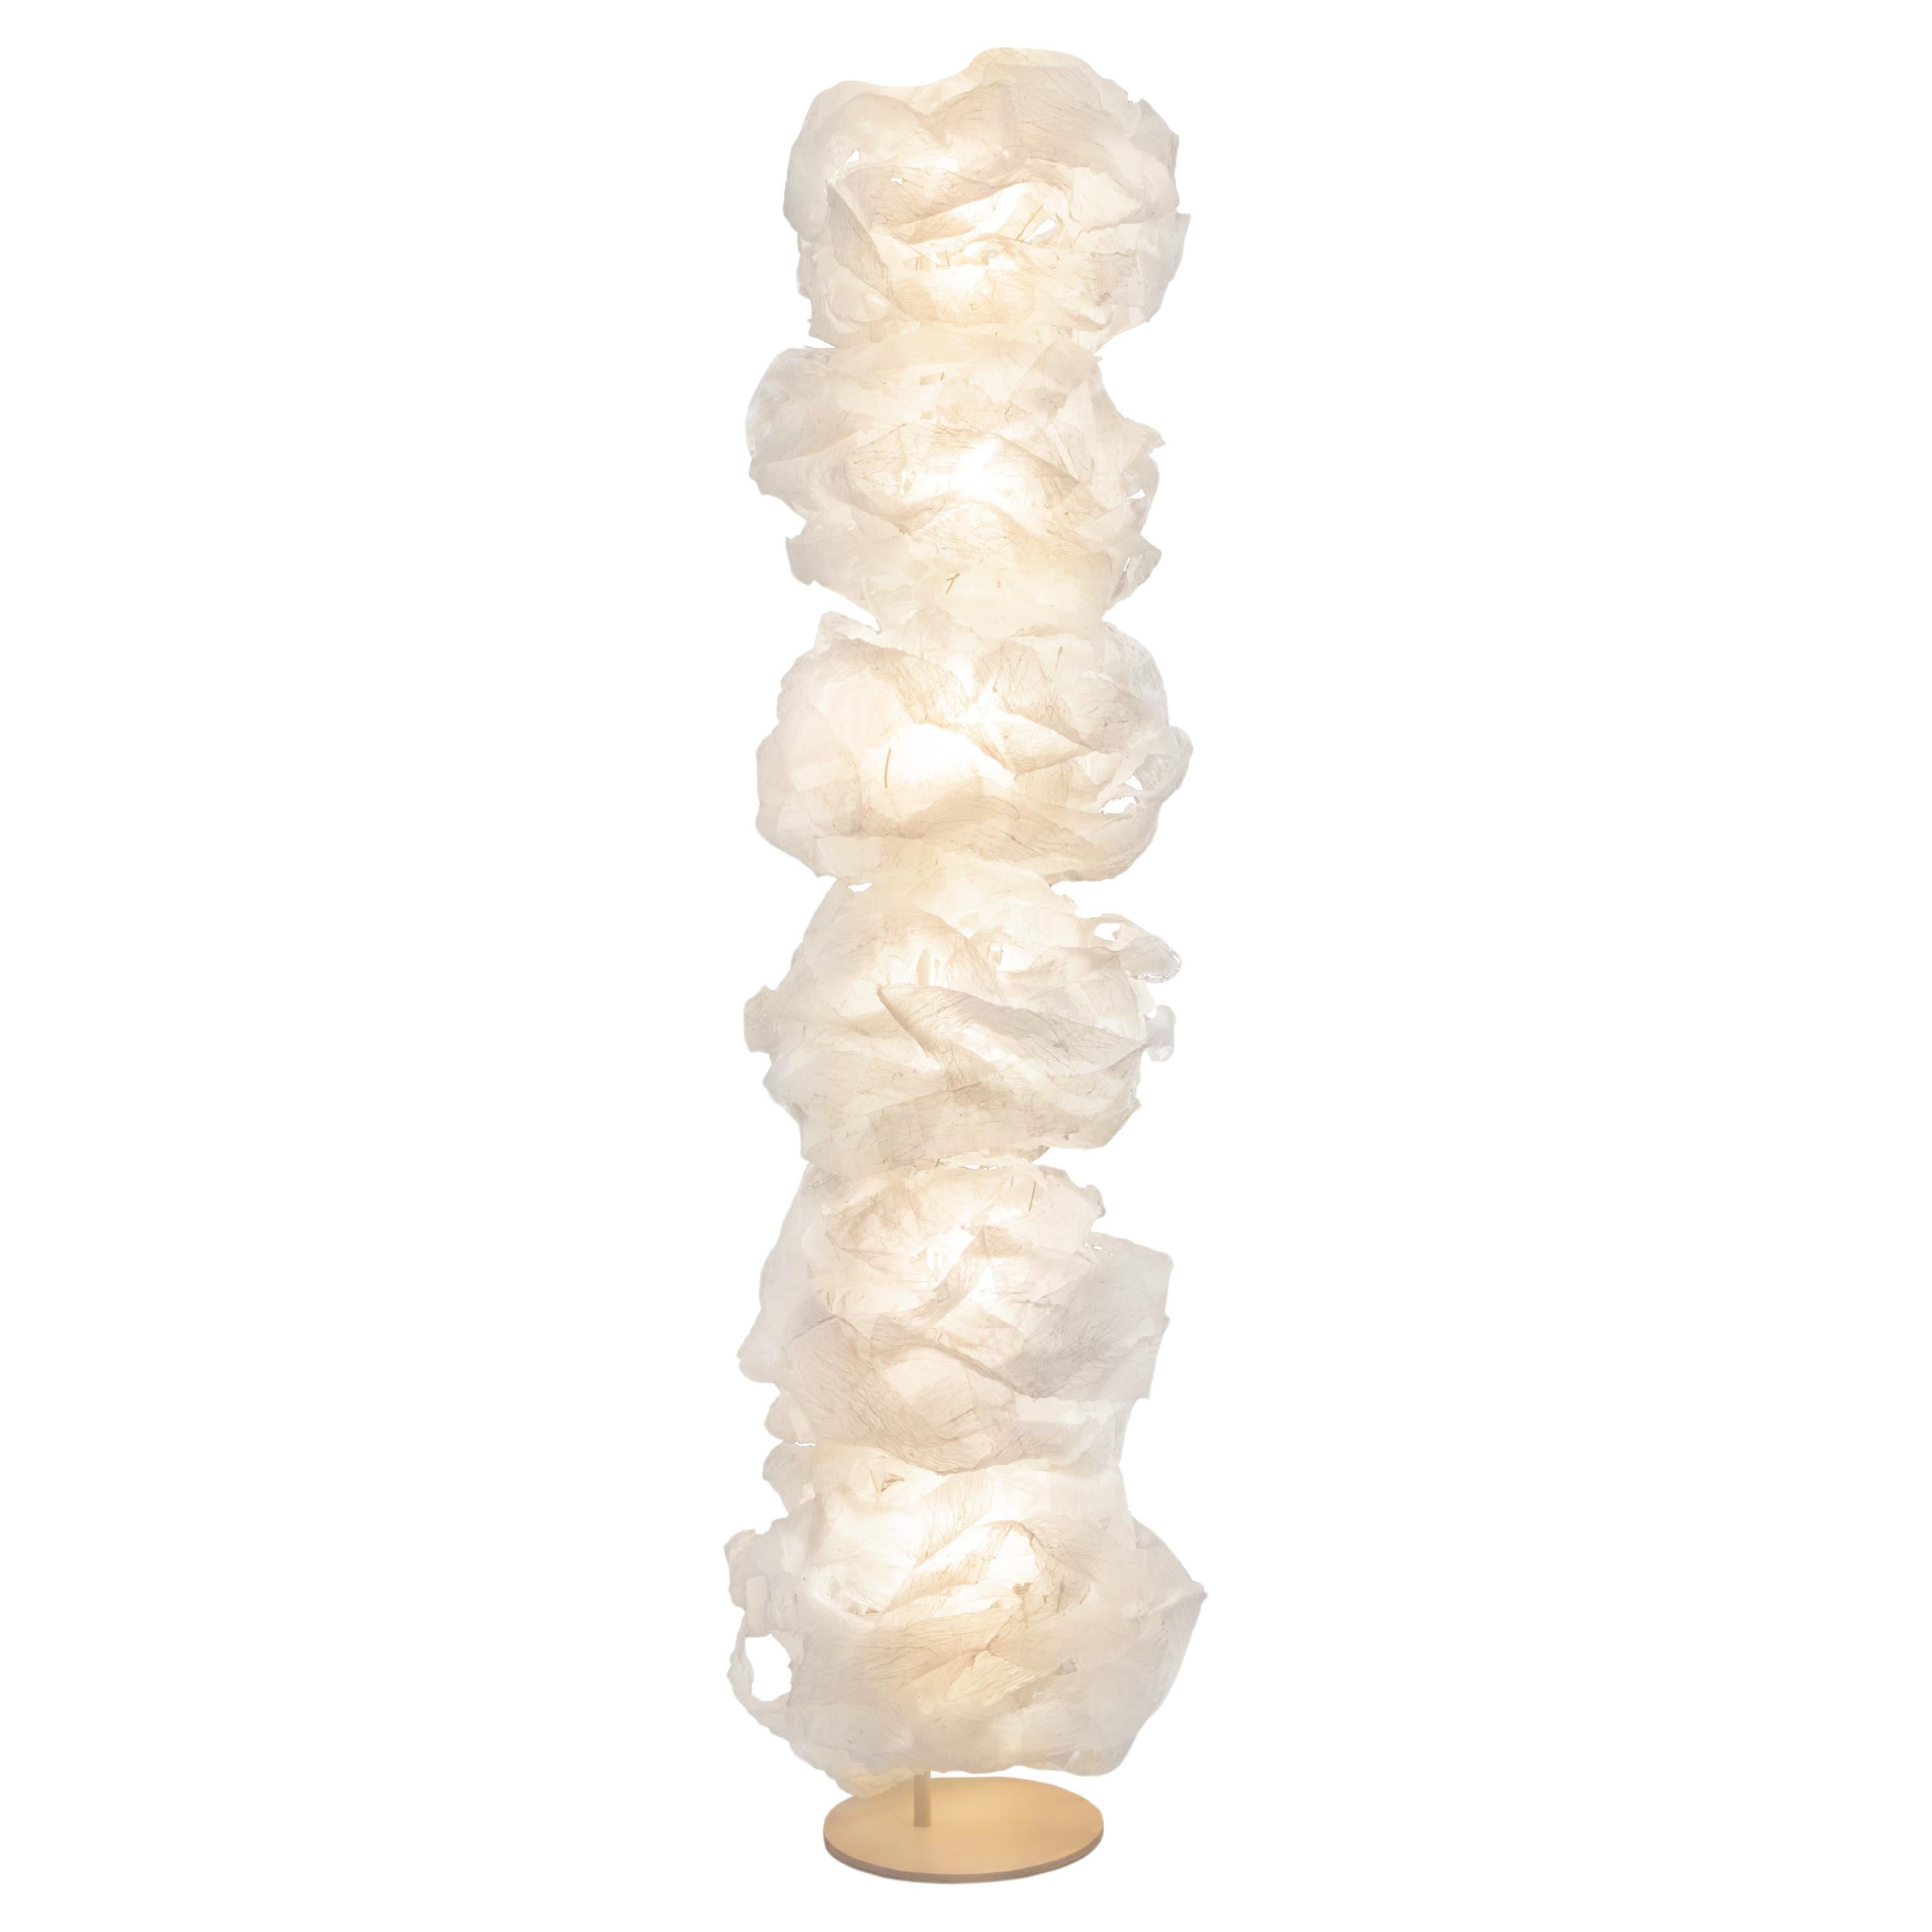 Transcendence Tower 6 - Hand-Crafted Diaphanous Cloud Freestanding Floor light For Sale